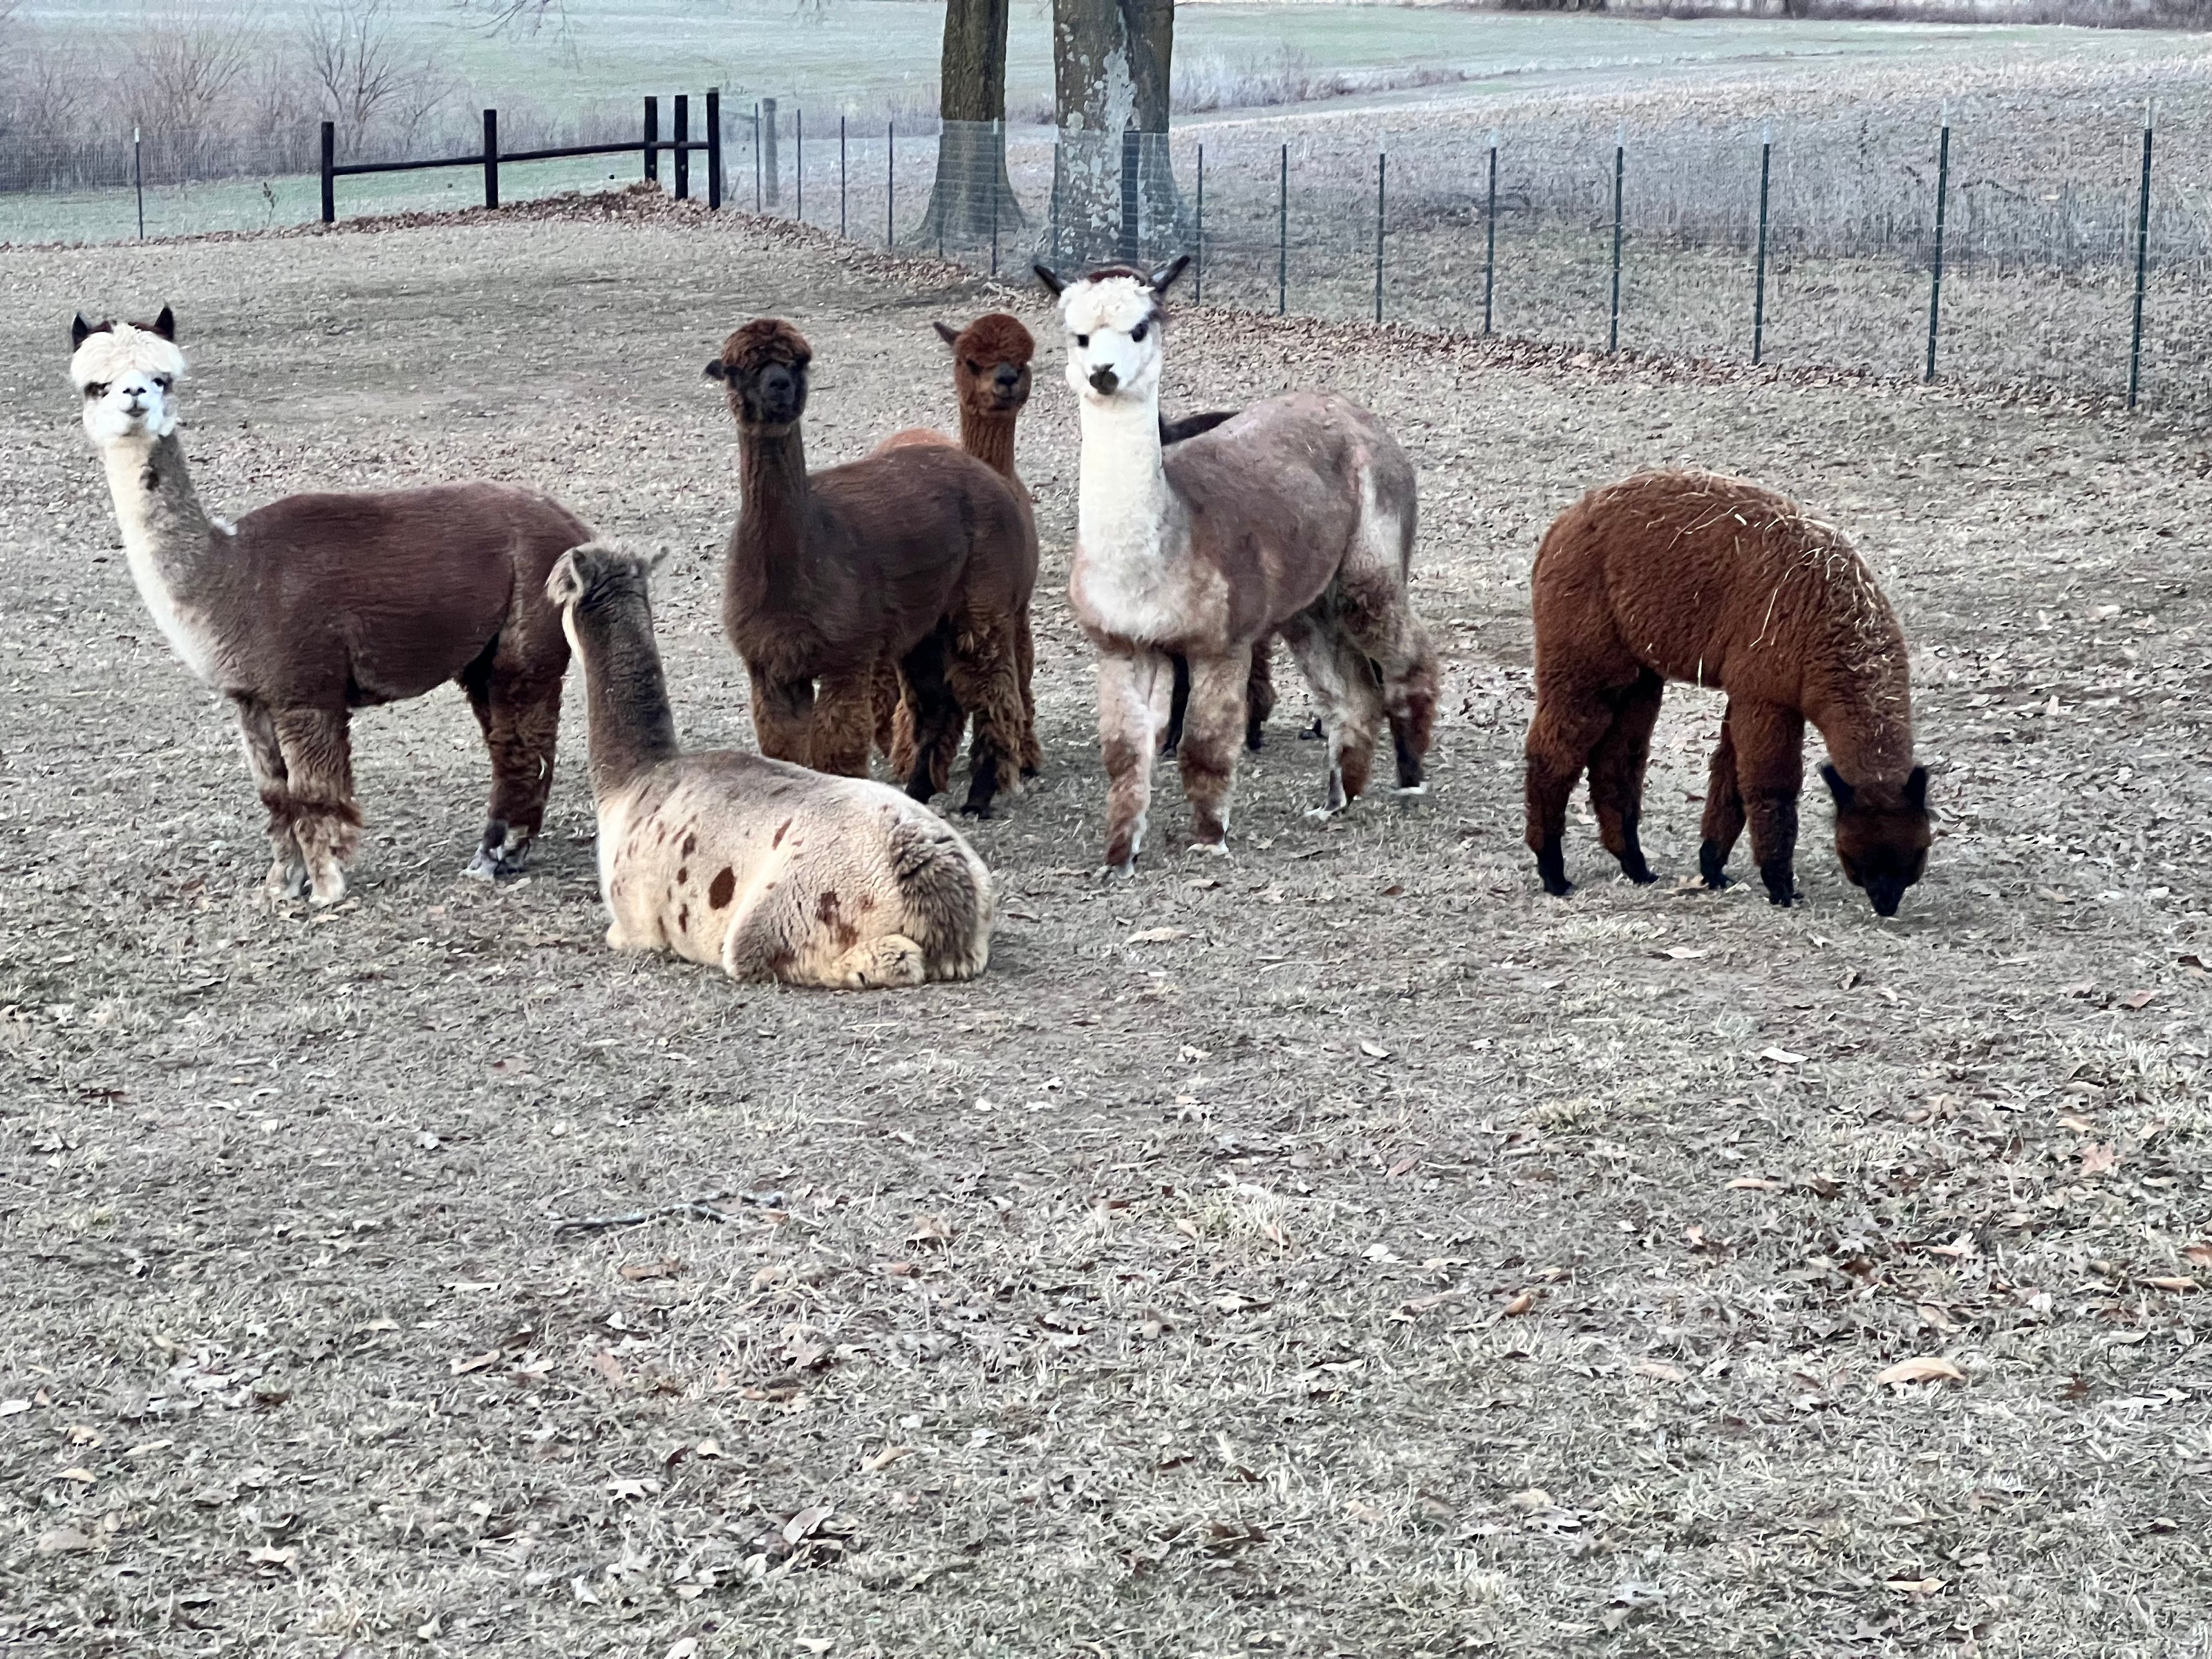 A group of charming alpacas in their natural habitat